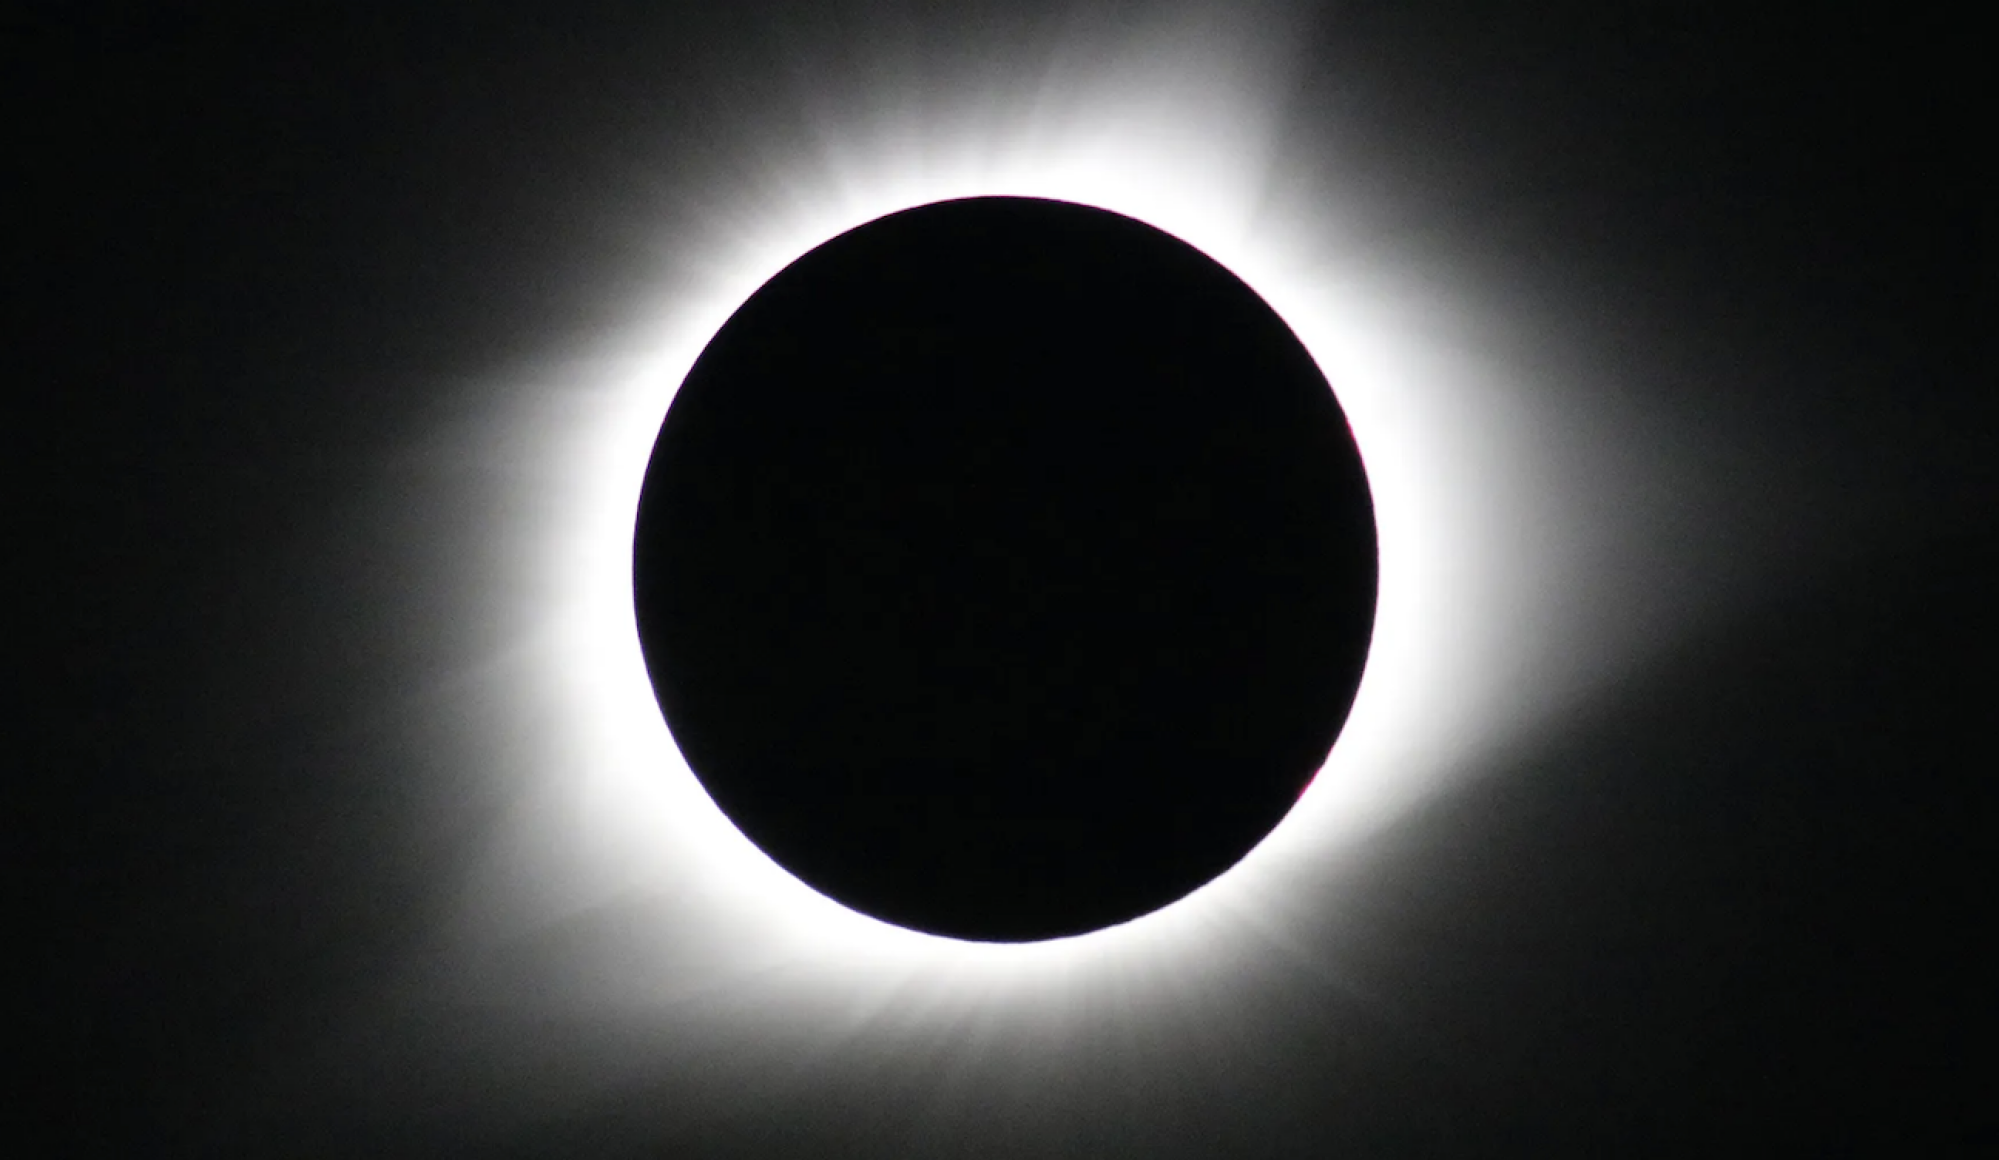 A total solar eclipse photographed in August 2017.